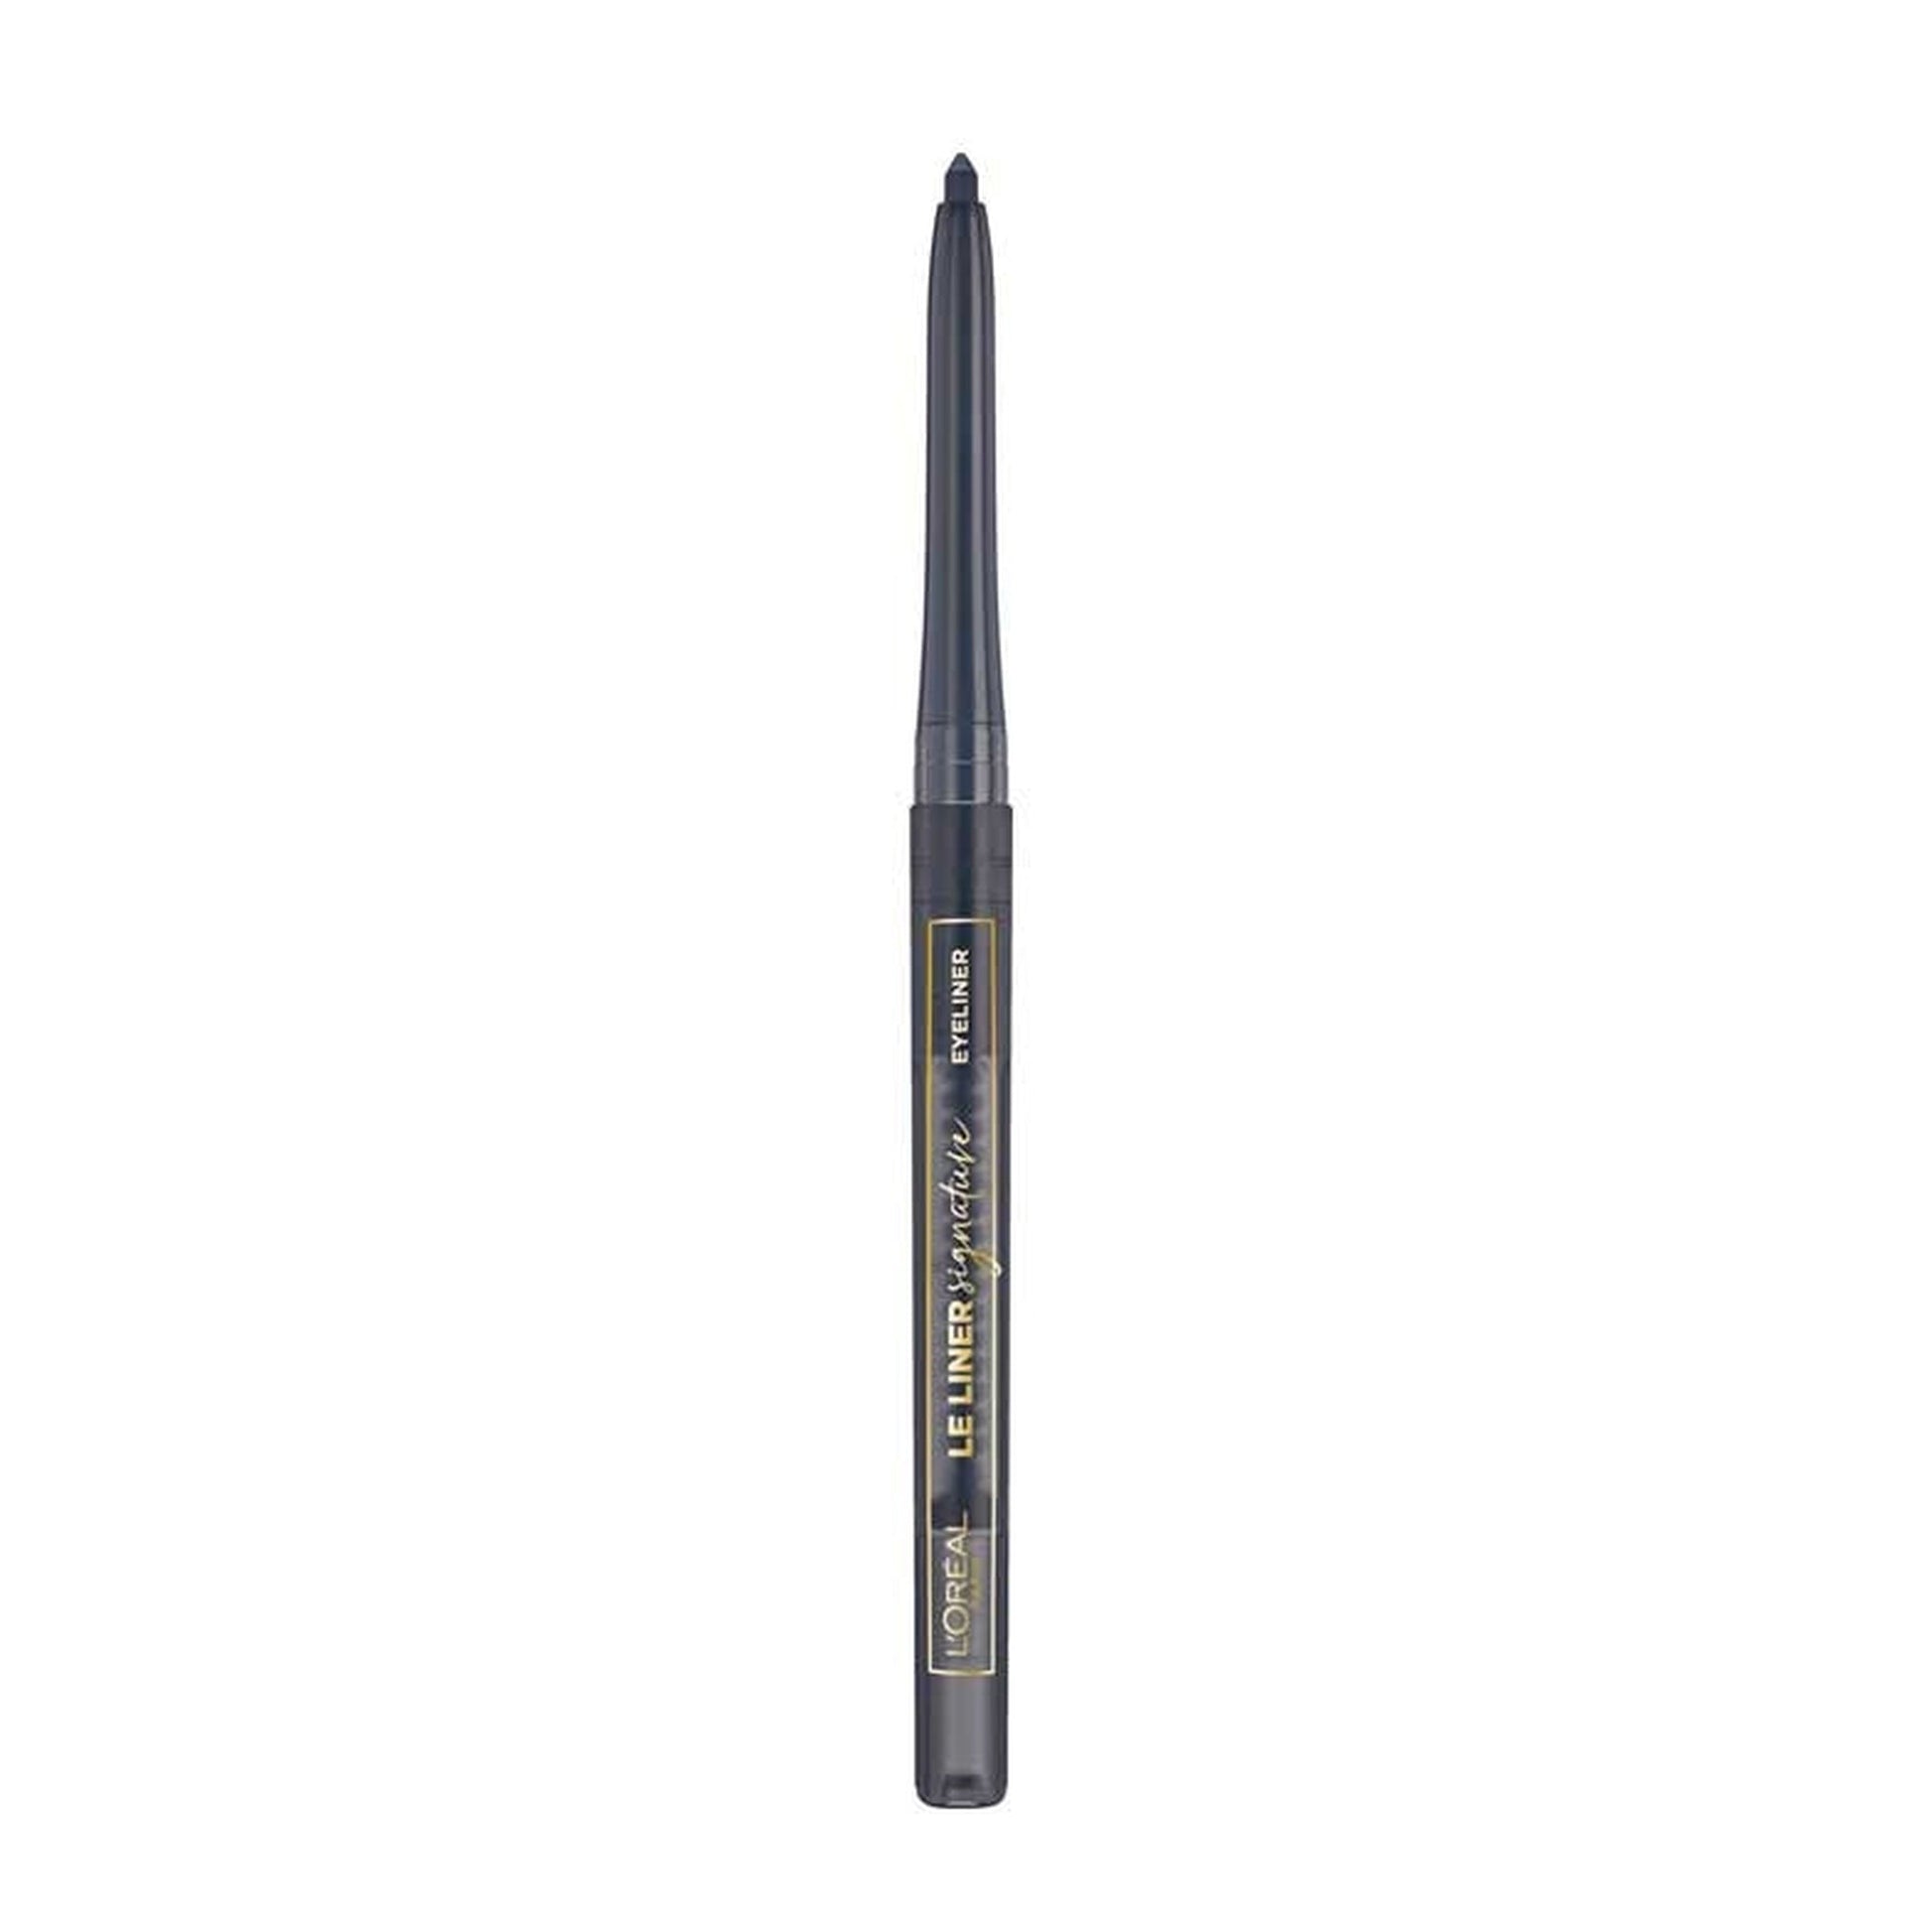 L'Oreal Paris Le Liner Signature Retractable Eyeliner 08 Taupe Grey Tweed-L'Oreal-BeautyNmakeup.co.uk